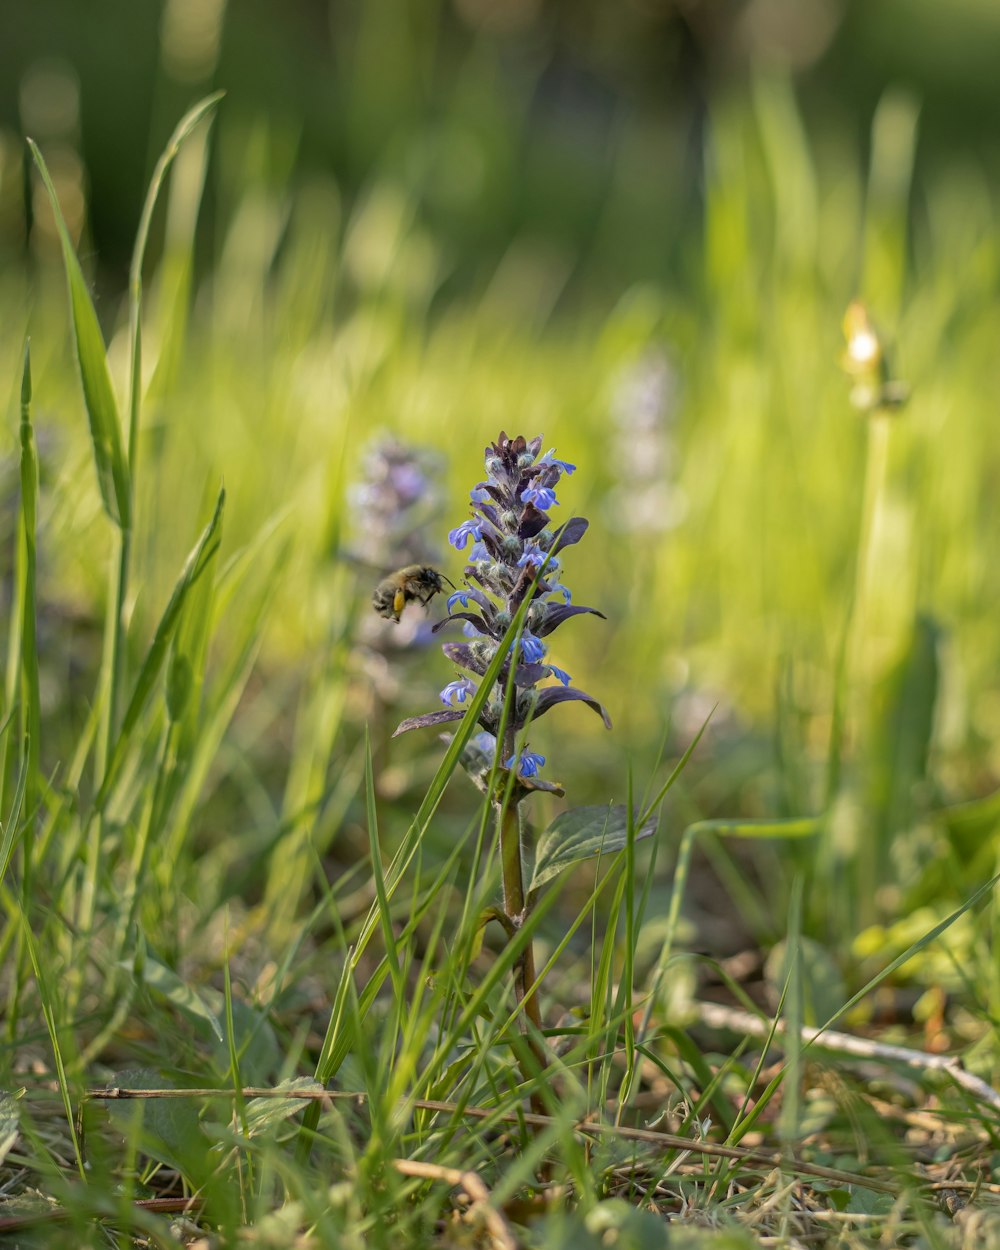 a small blue flower in a grassy field